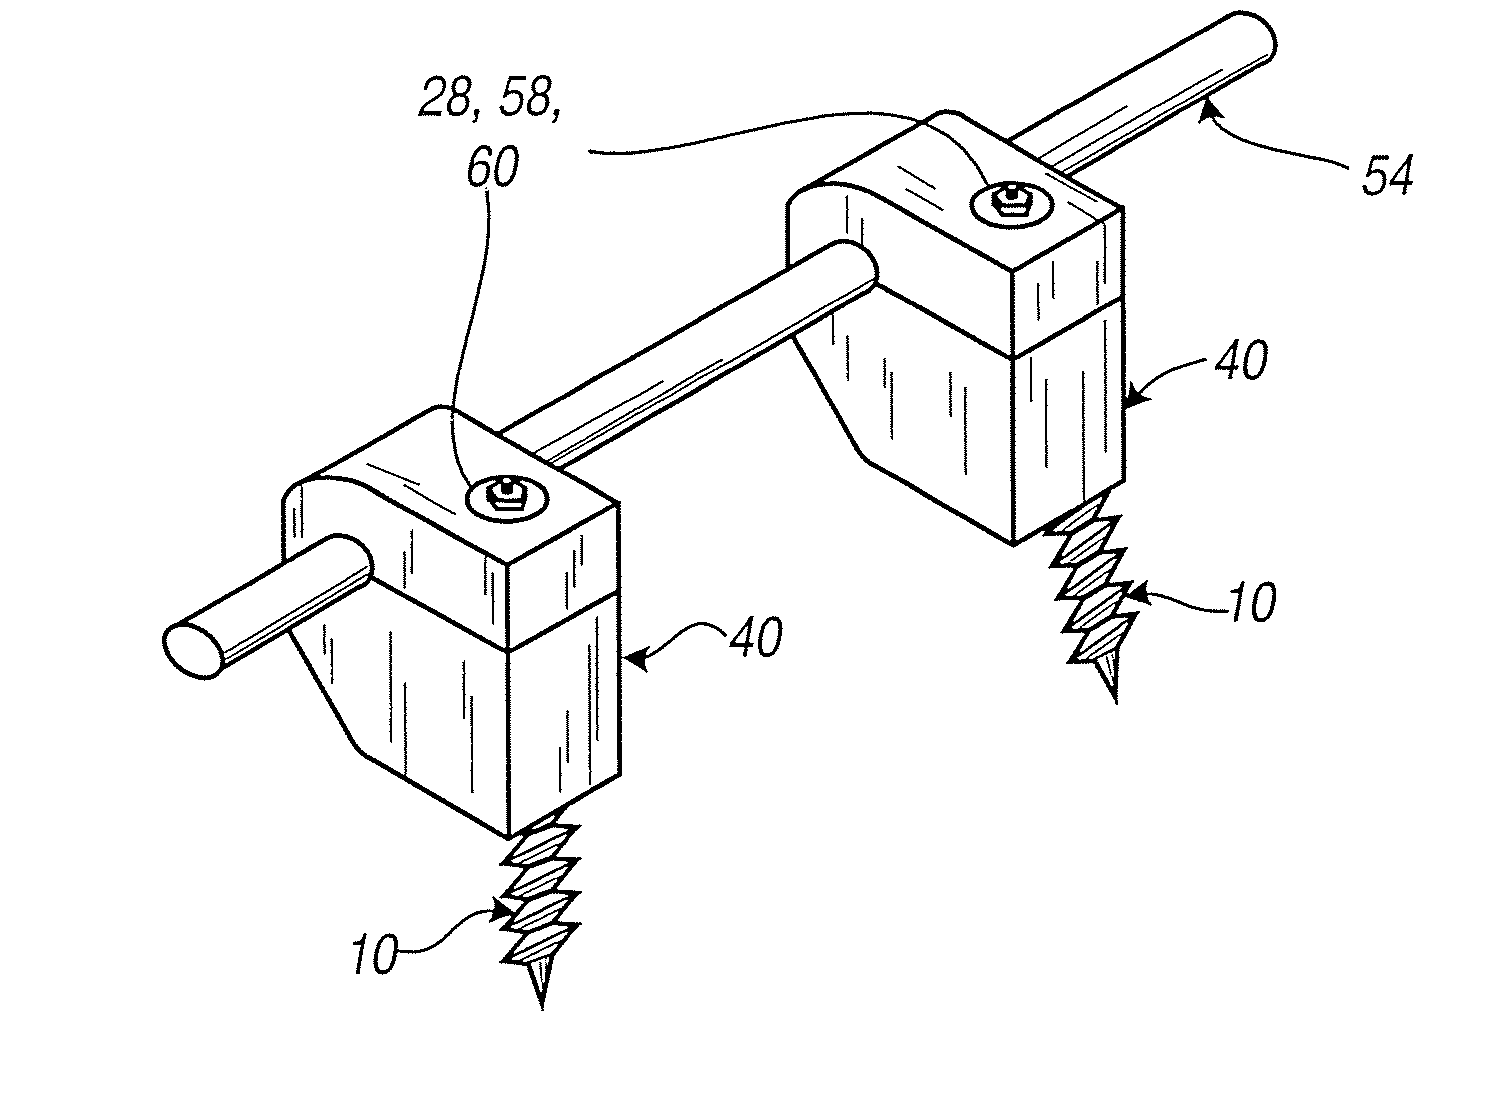 Connection Rod for Screw or Hook Polyaxial System and Method of Use